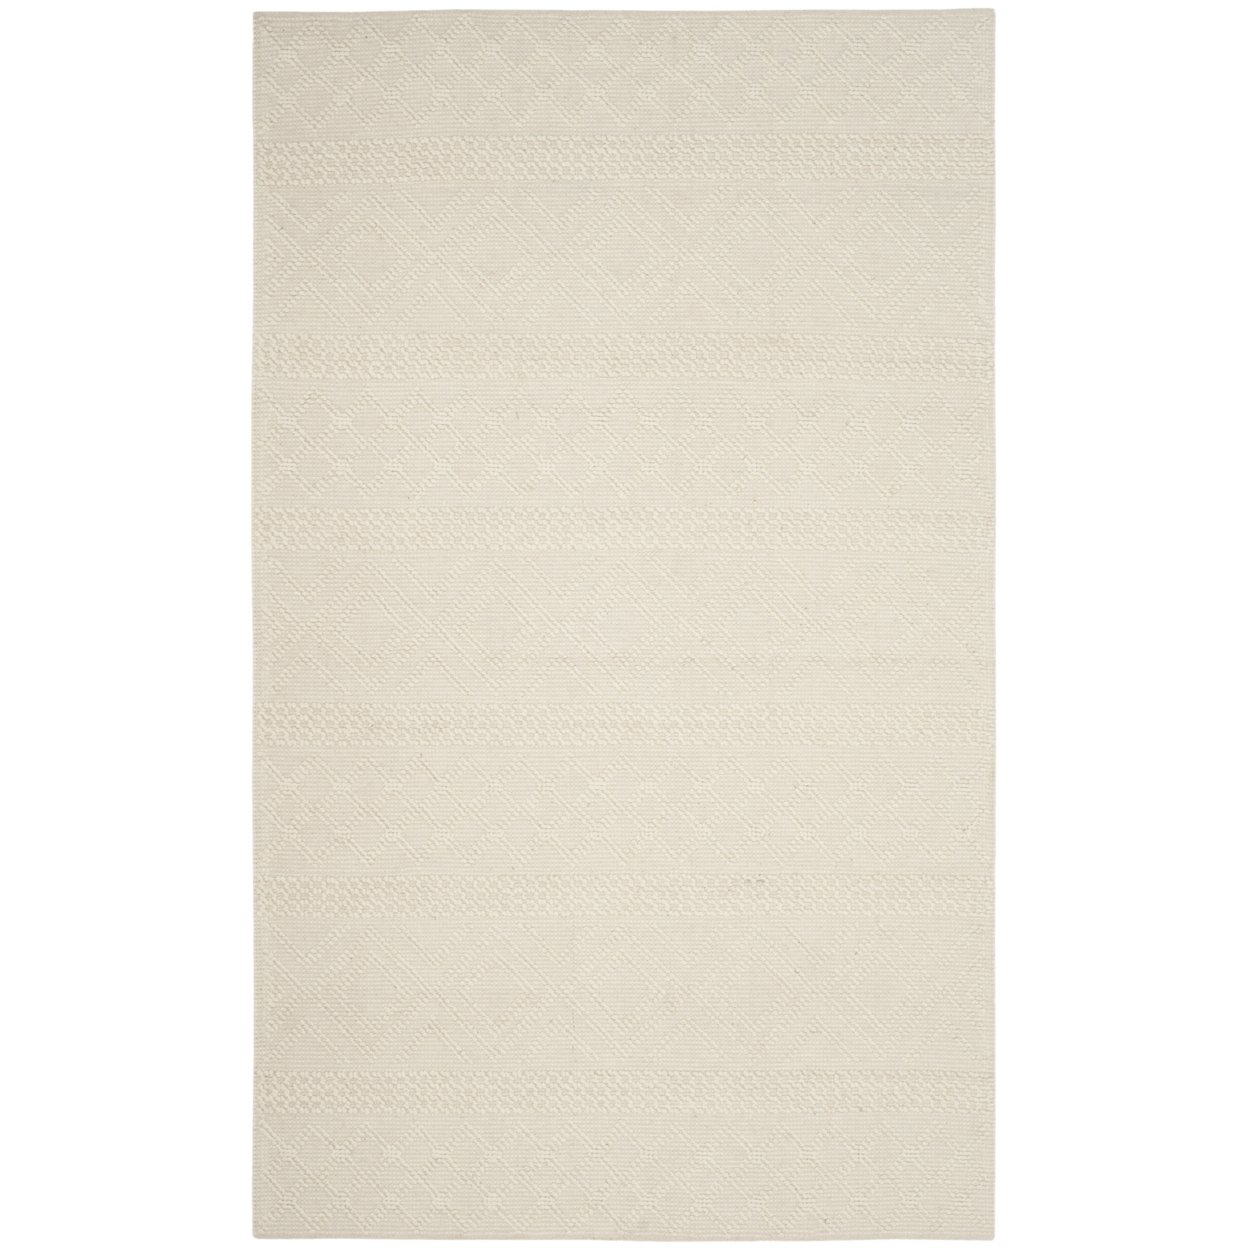 SAFAVIEH Vermont Collection VRM211A Handwoven Ivory Rug - 6 X 6 Square